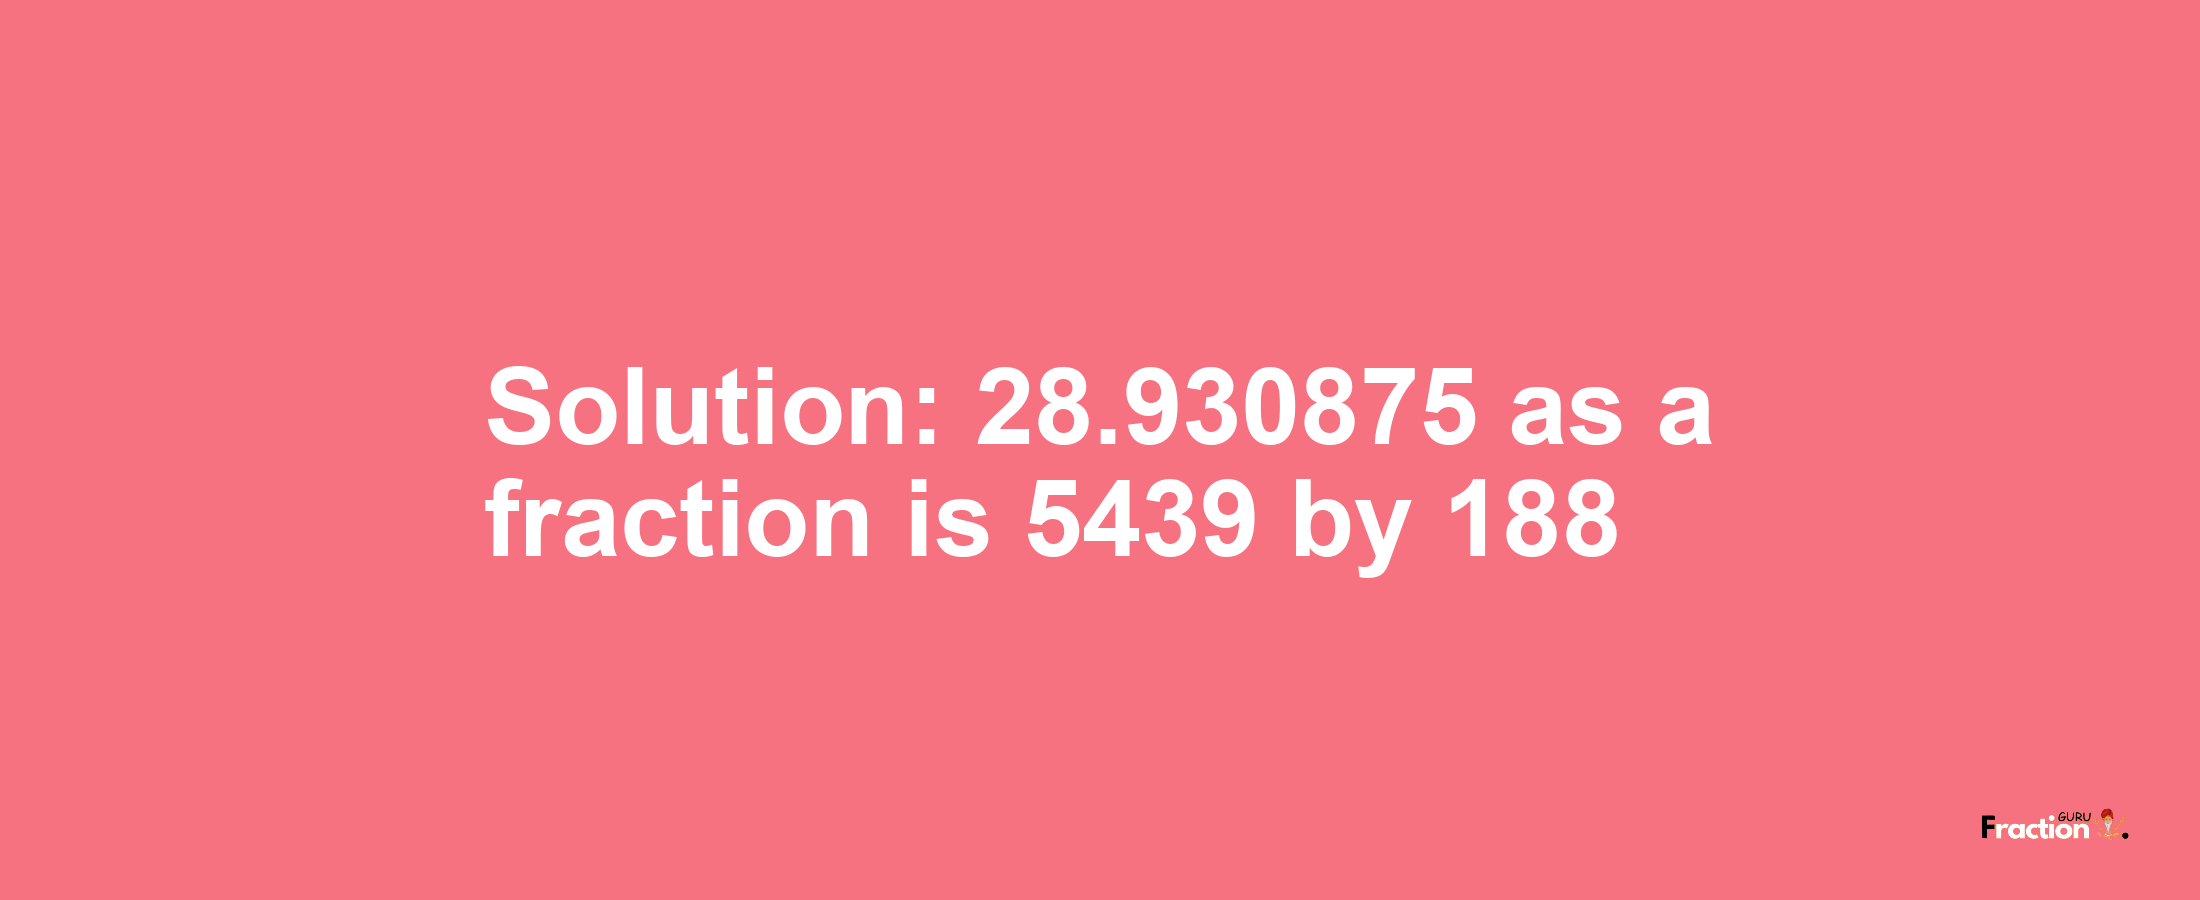 Solution:28.930875 as a fraction is 5439/188